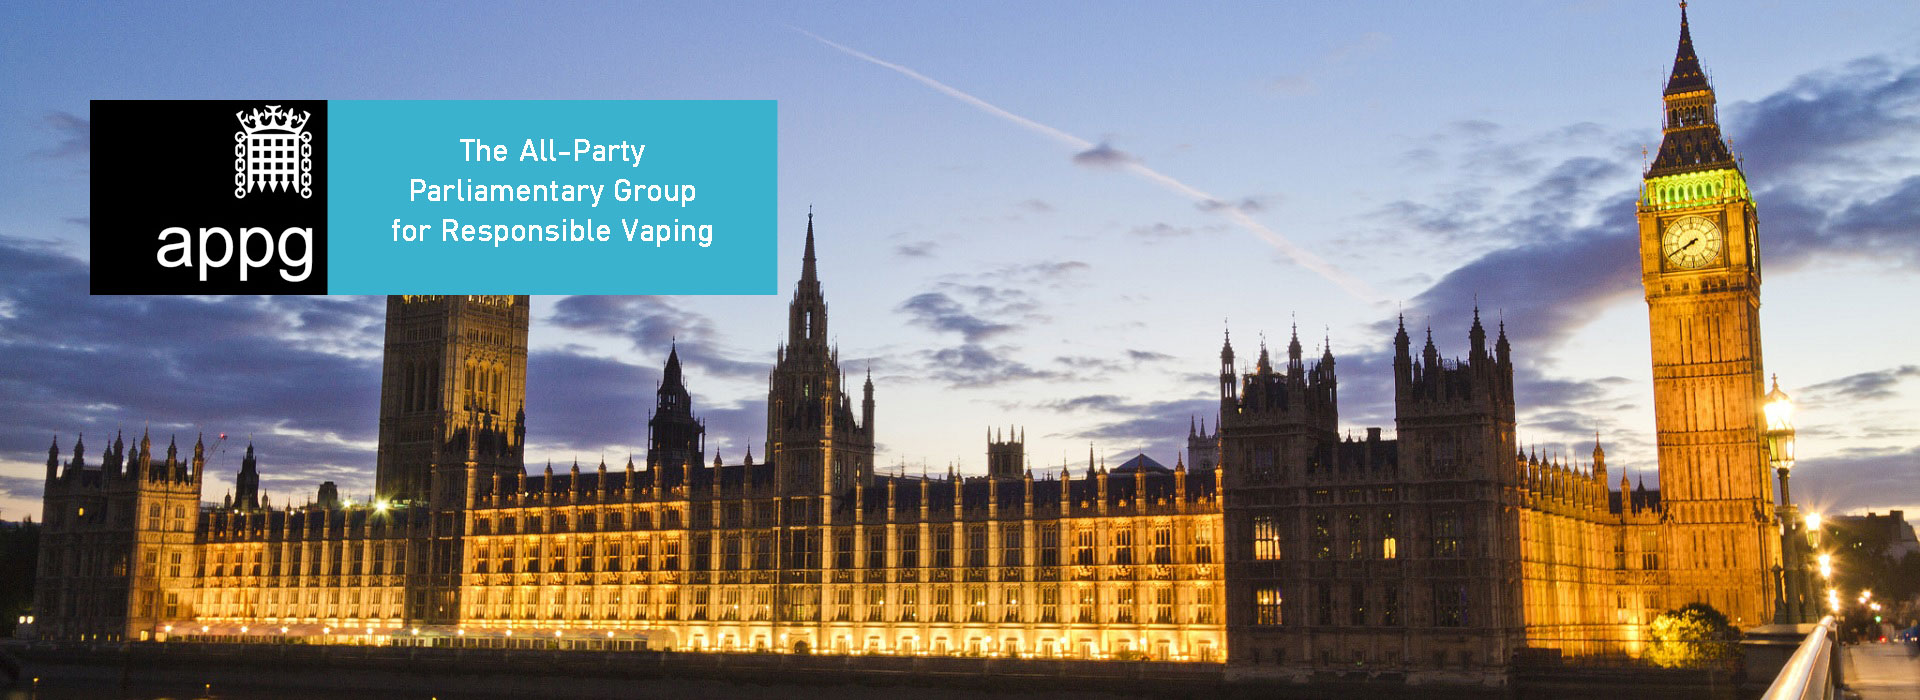 The All-Party Parliamentary Group for Responsible Vaping